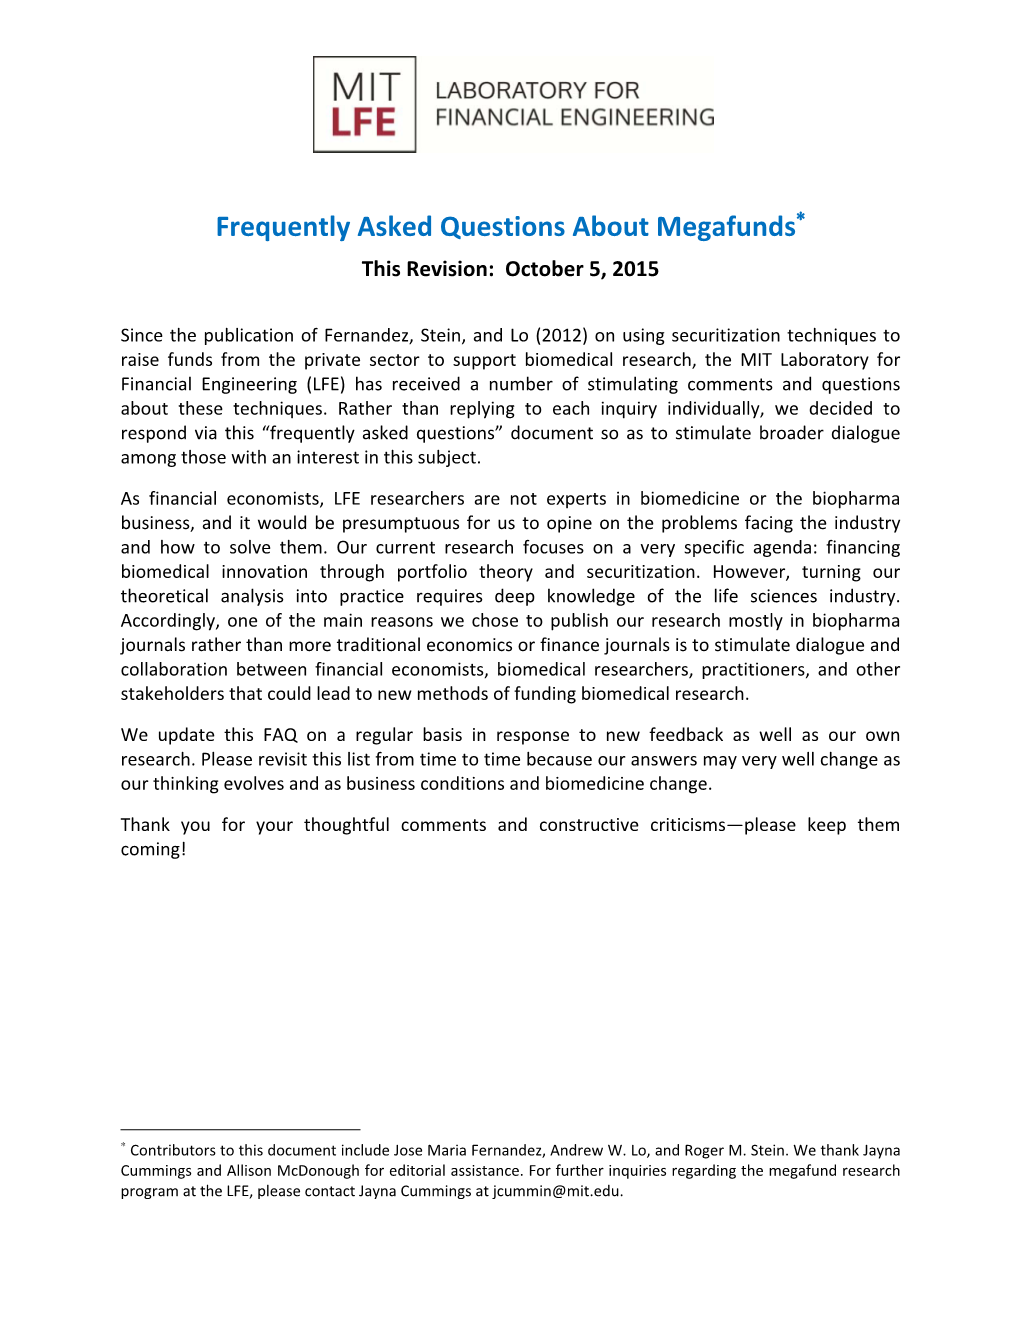 Frequently Asked Questions About Megafunds This Revision: October 5, 2015